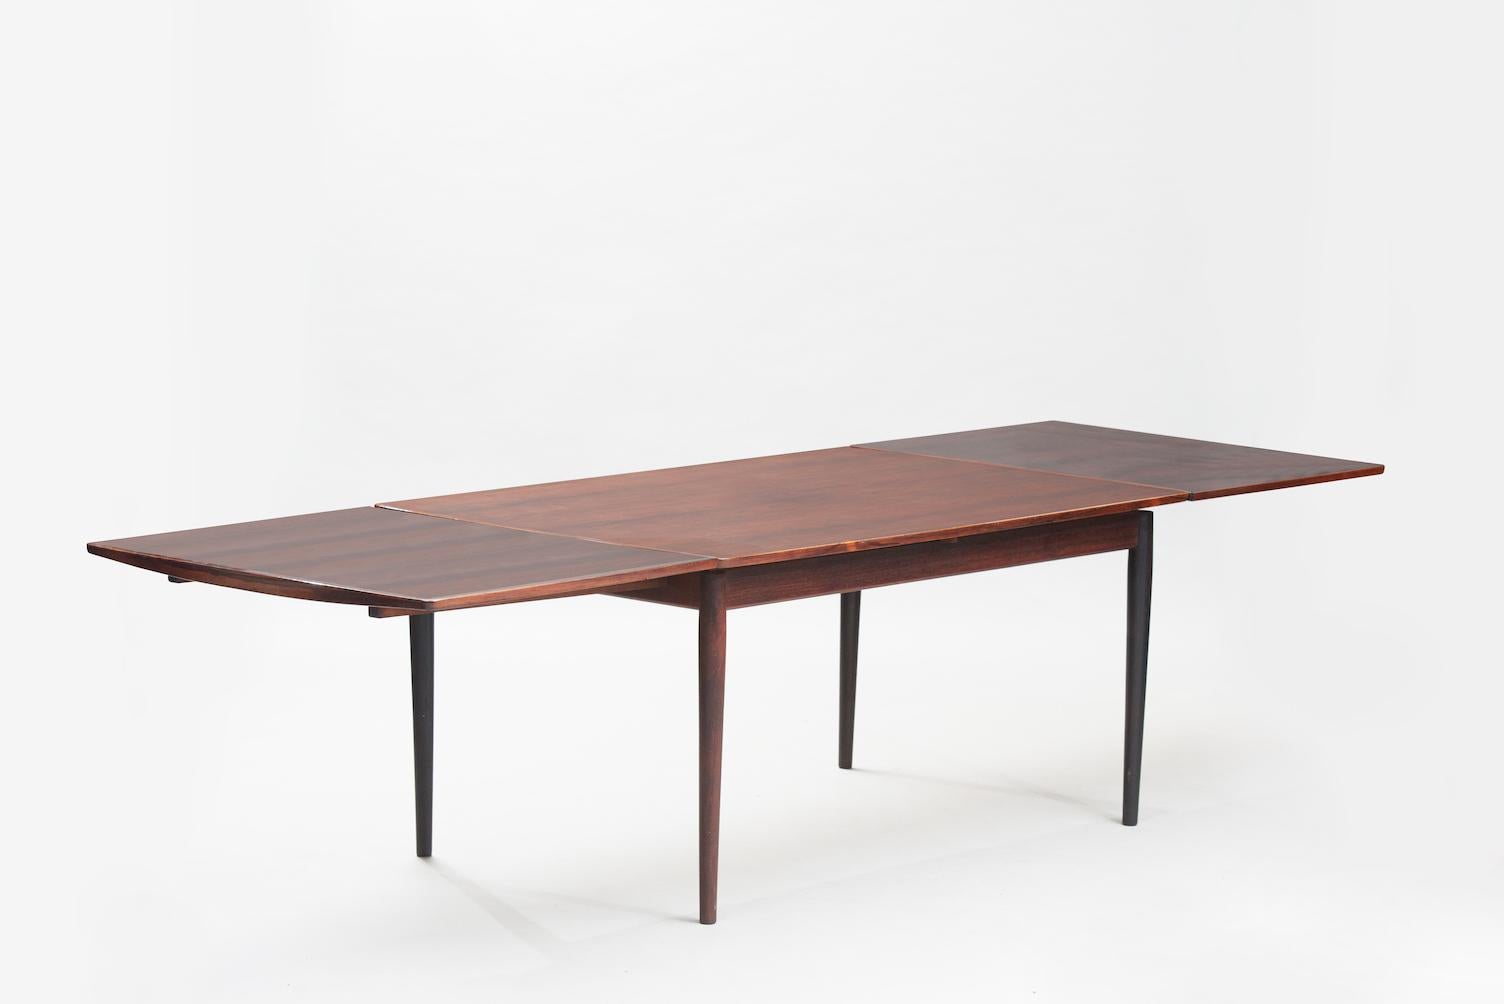 Extendible rosewood rectangular dining table.
Measures: W 150 cm (closed), 296 cm (open)
This item is in original condition, can be sold as it is or fully restored, the price shown is in original condition.